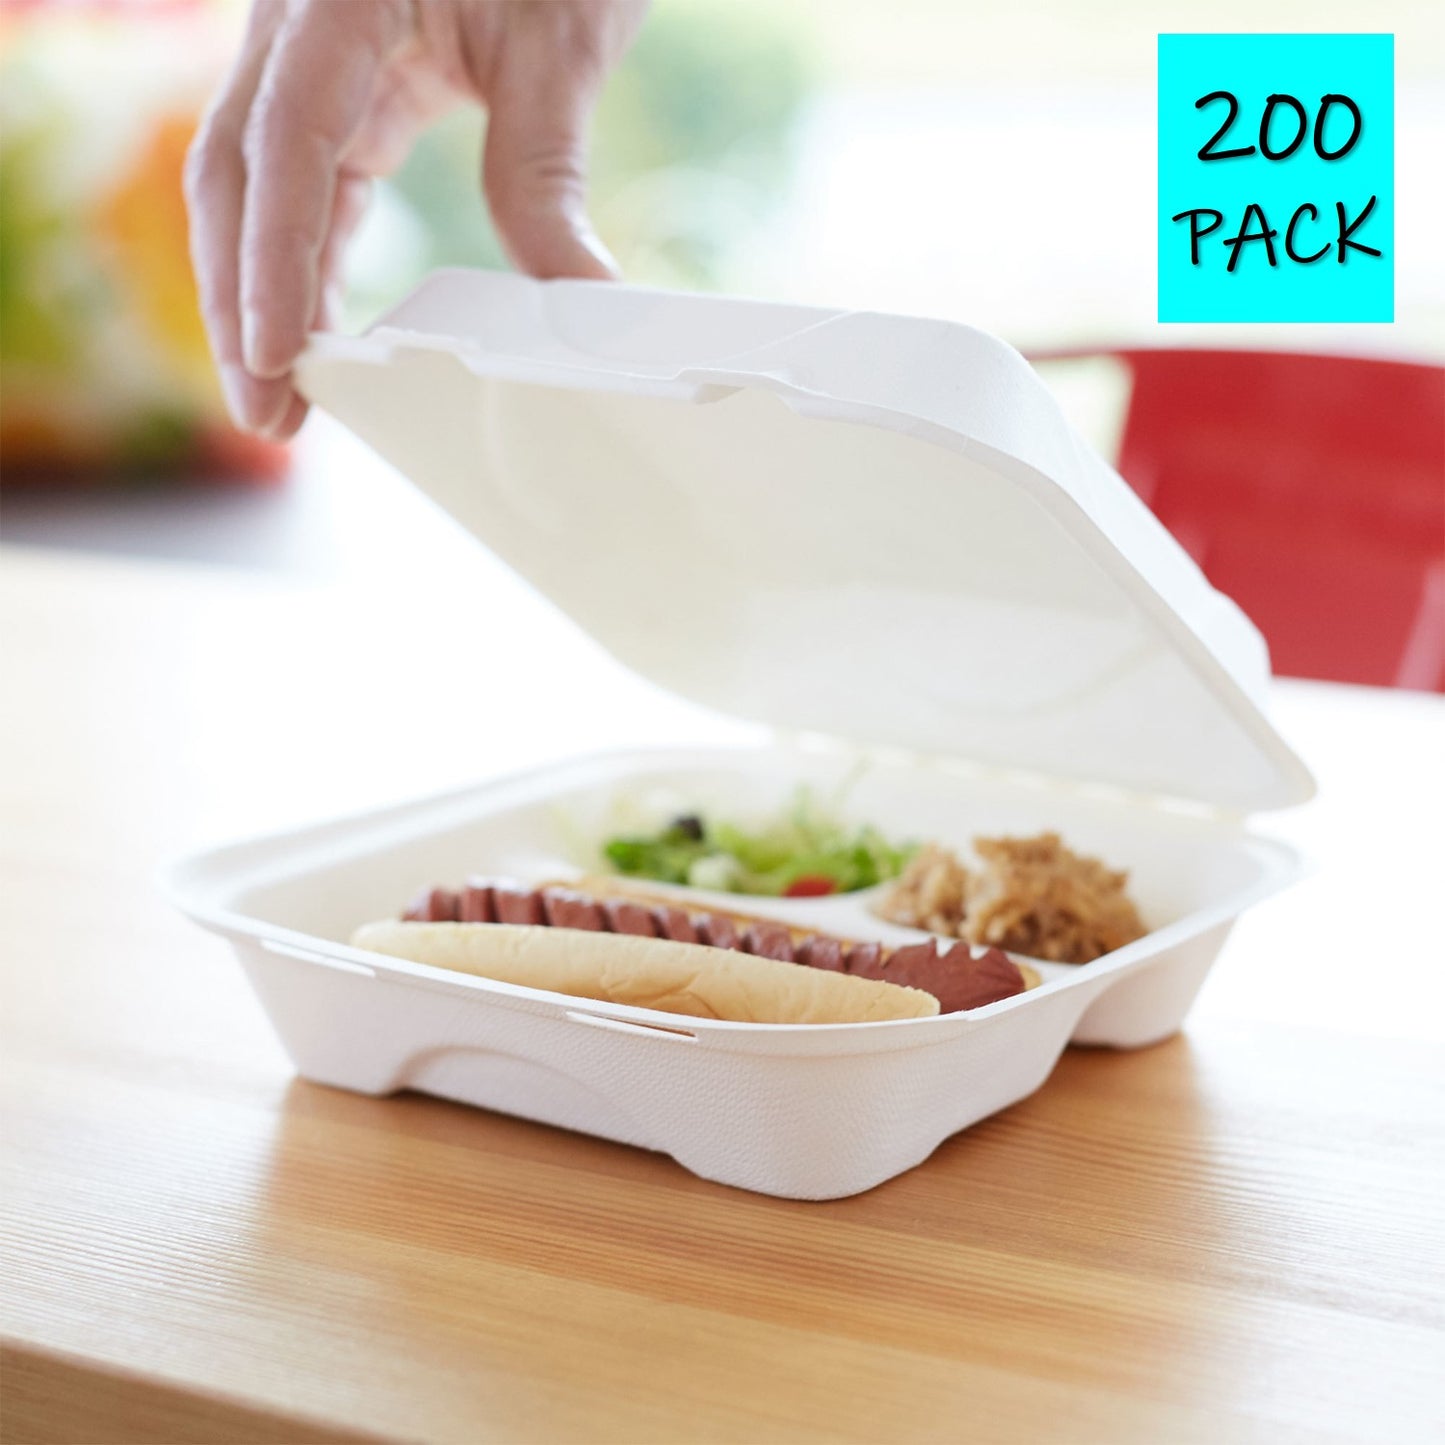 6 x 6 x 3 Biodegradable, Compostable, Sugarcane Bagasse 1 Compartment  Clamshell Takeout Container